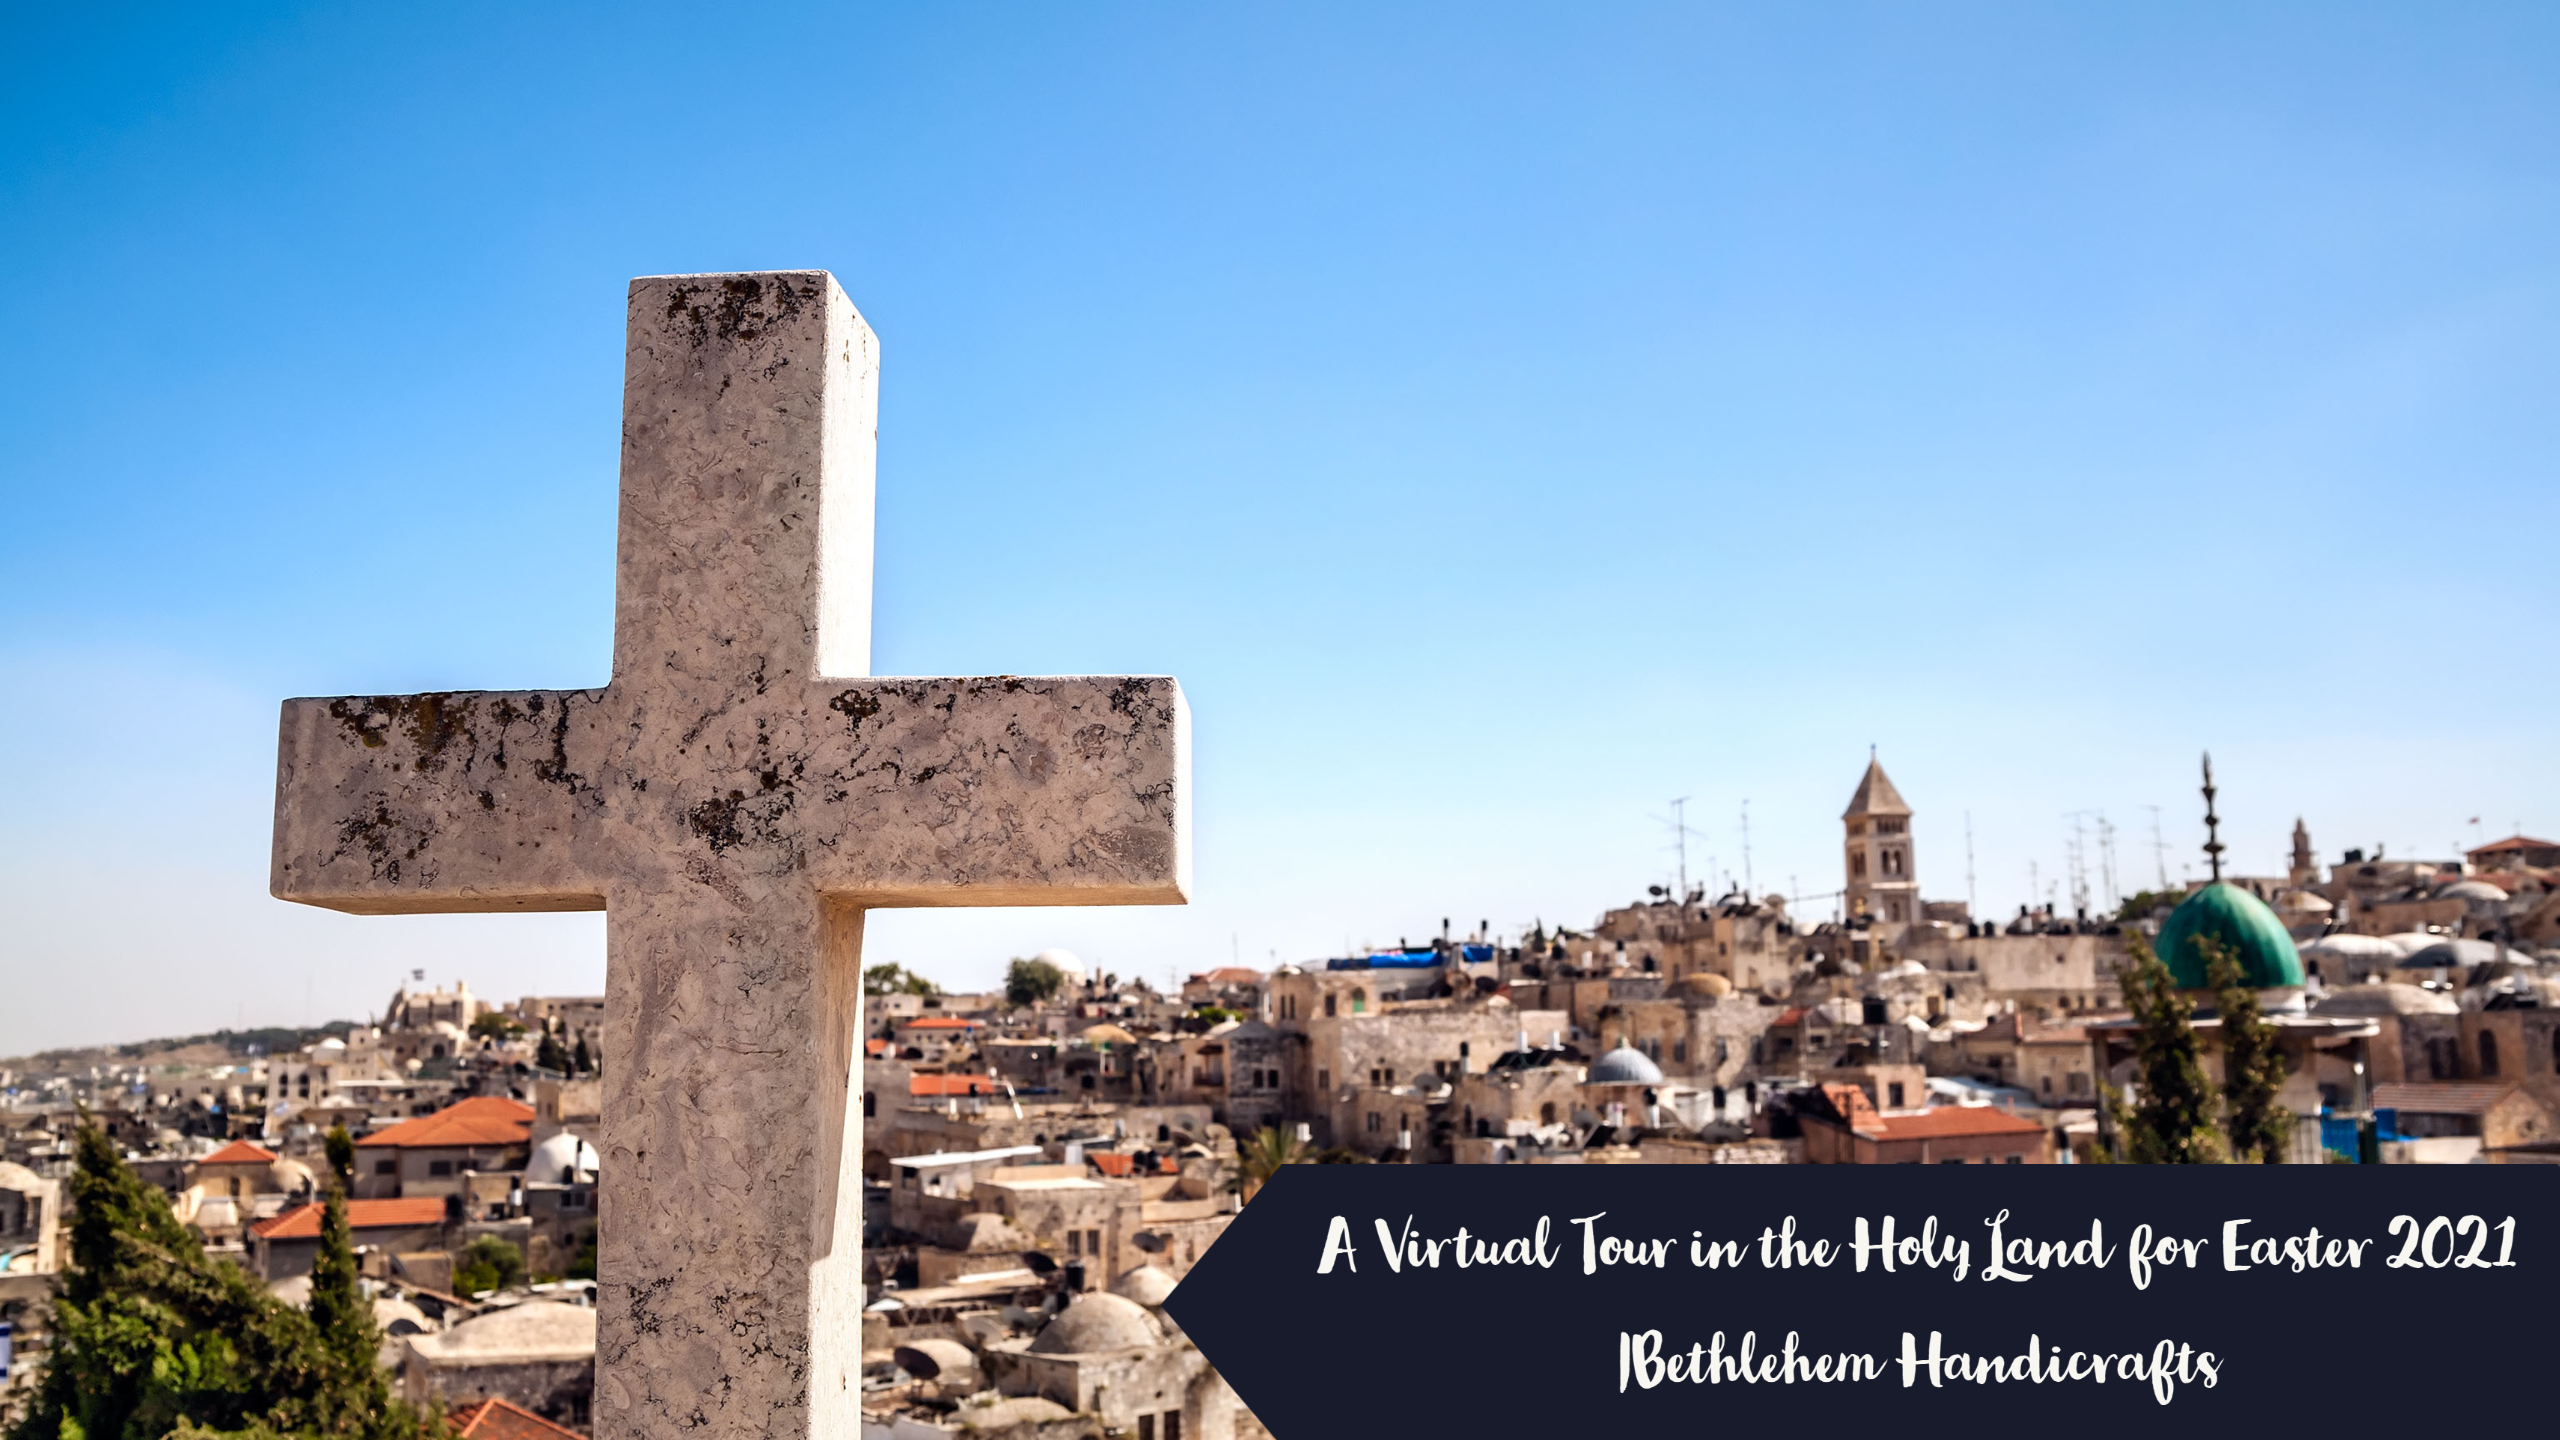 A Virtual Tour in the Holy Land for Easter 2021 | Bethlehem Handicrafts